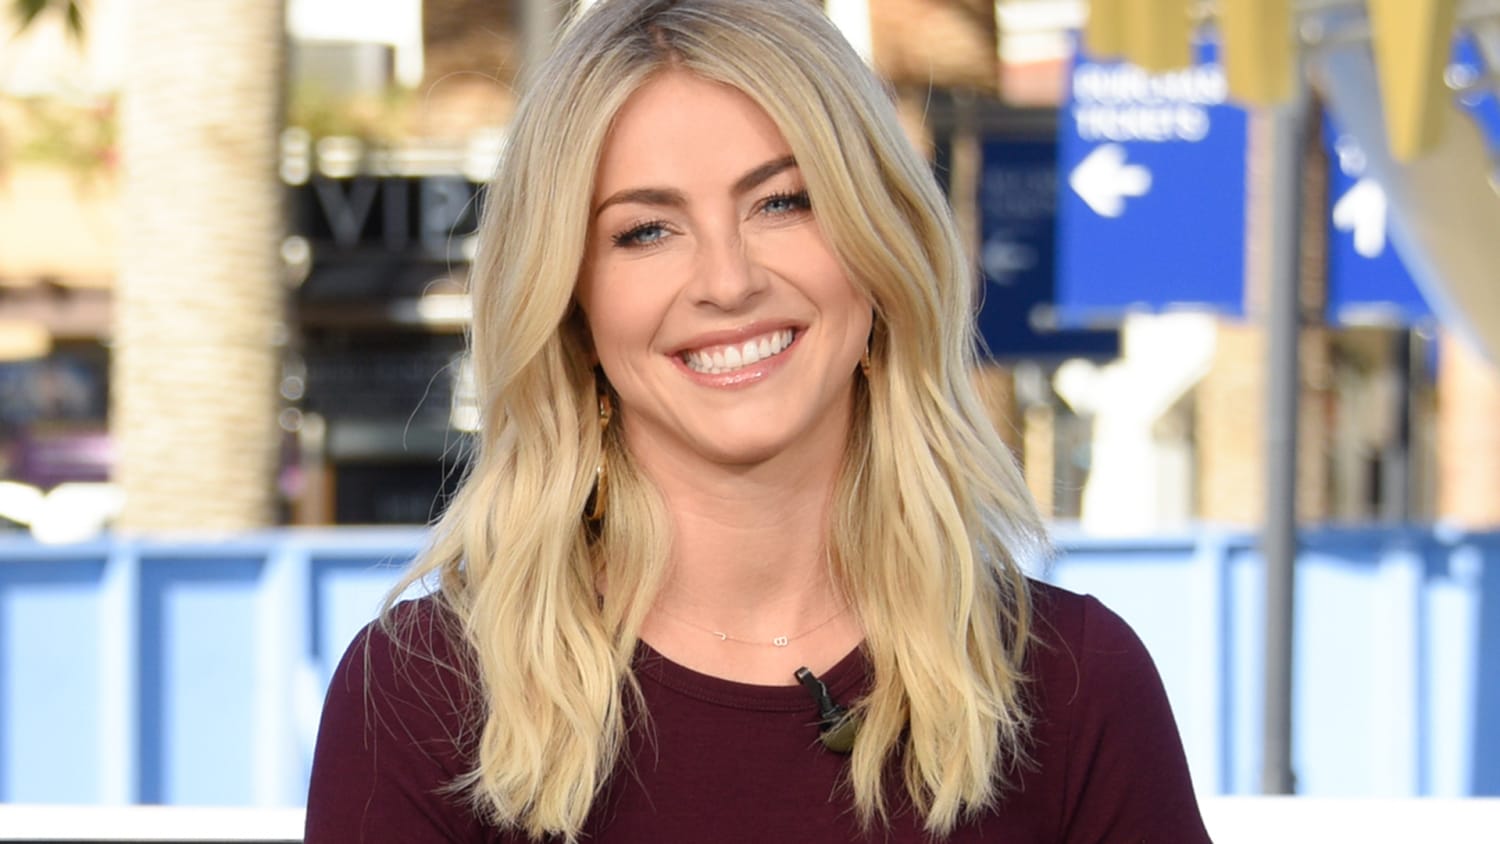 Julianne Hough Shares Surprising Throwback Pics To Honor Harry Potter Anniversary